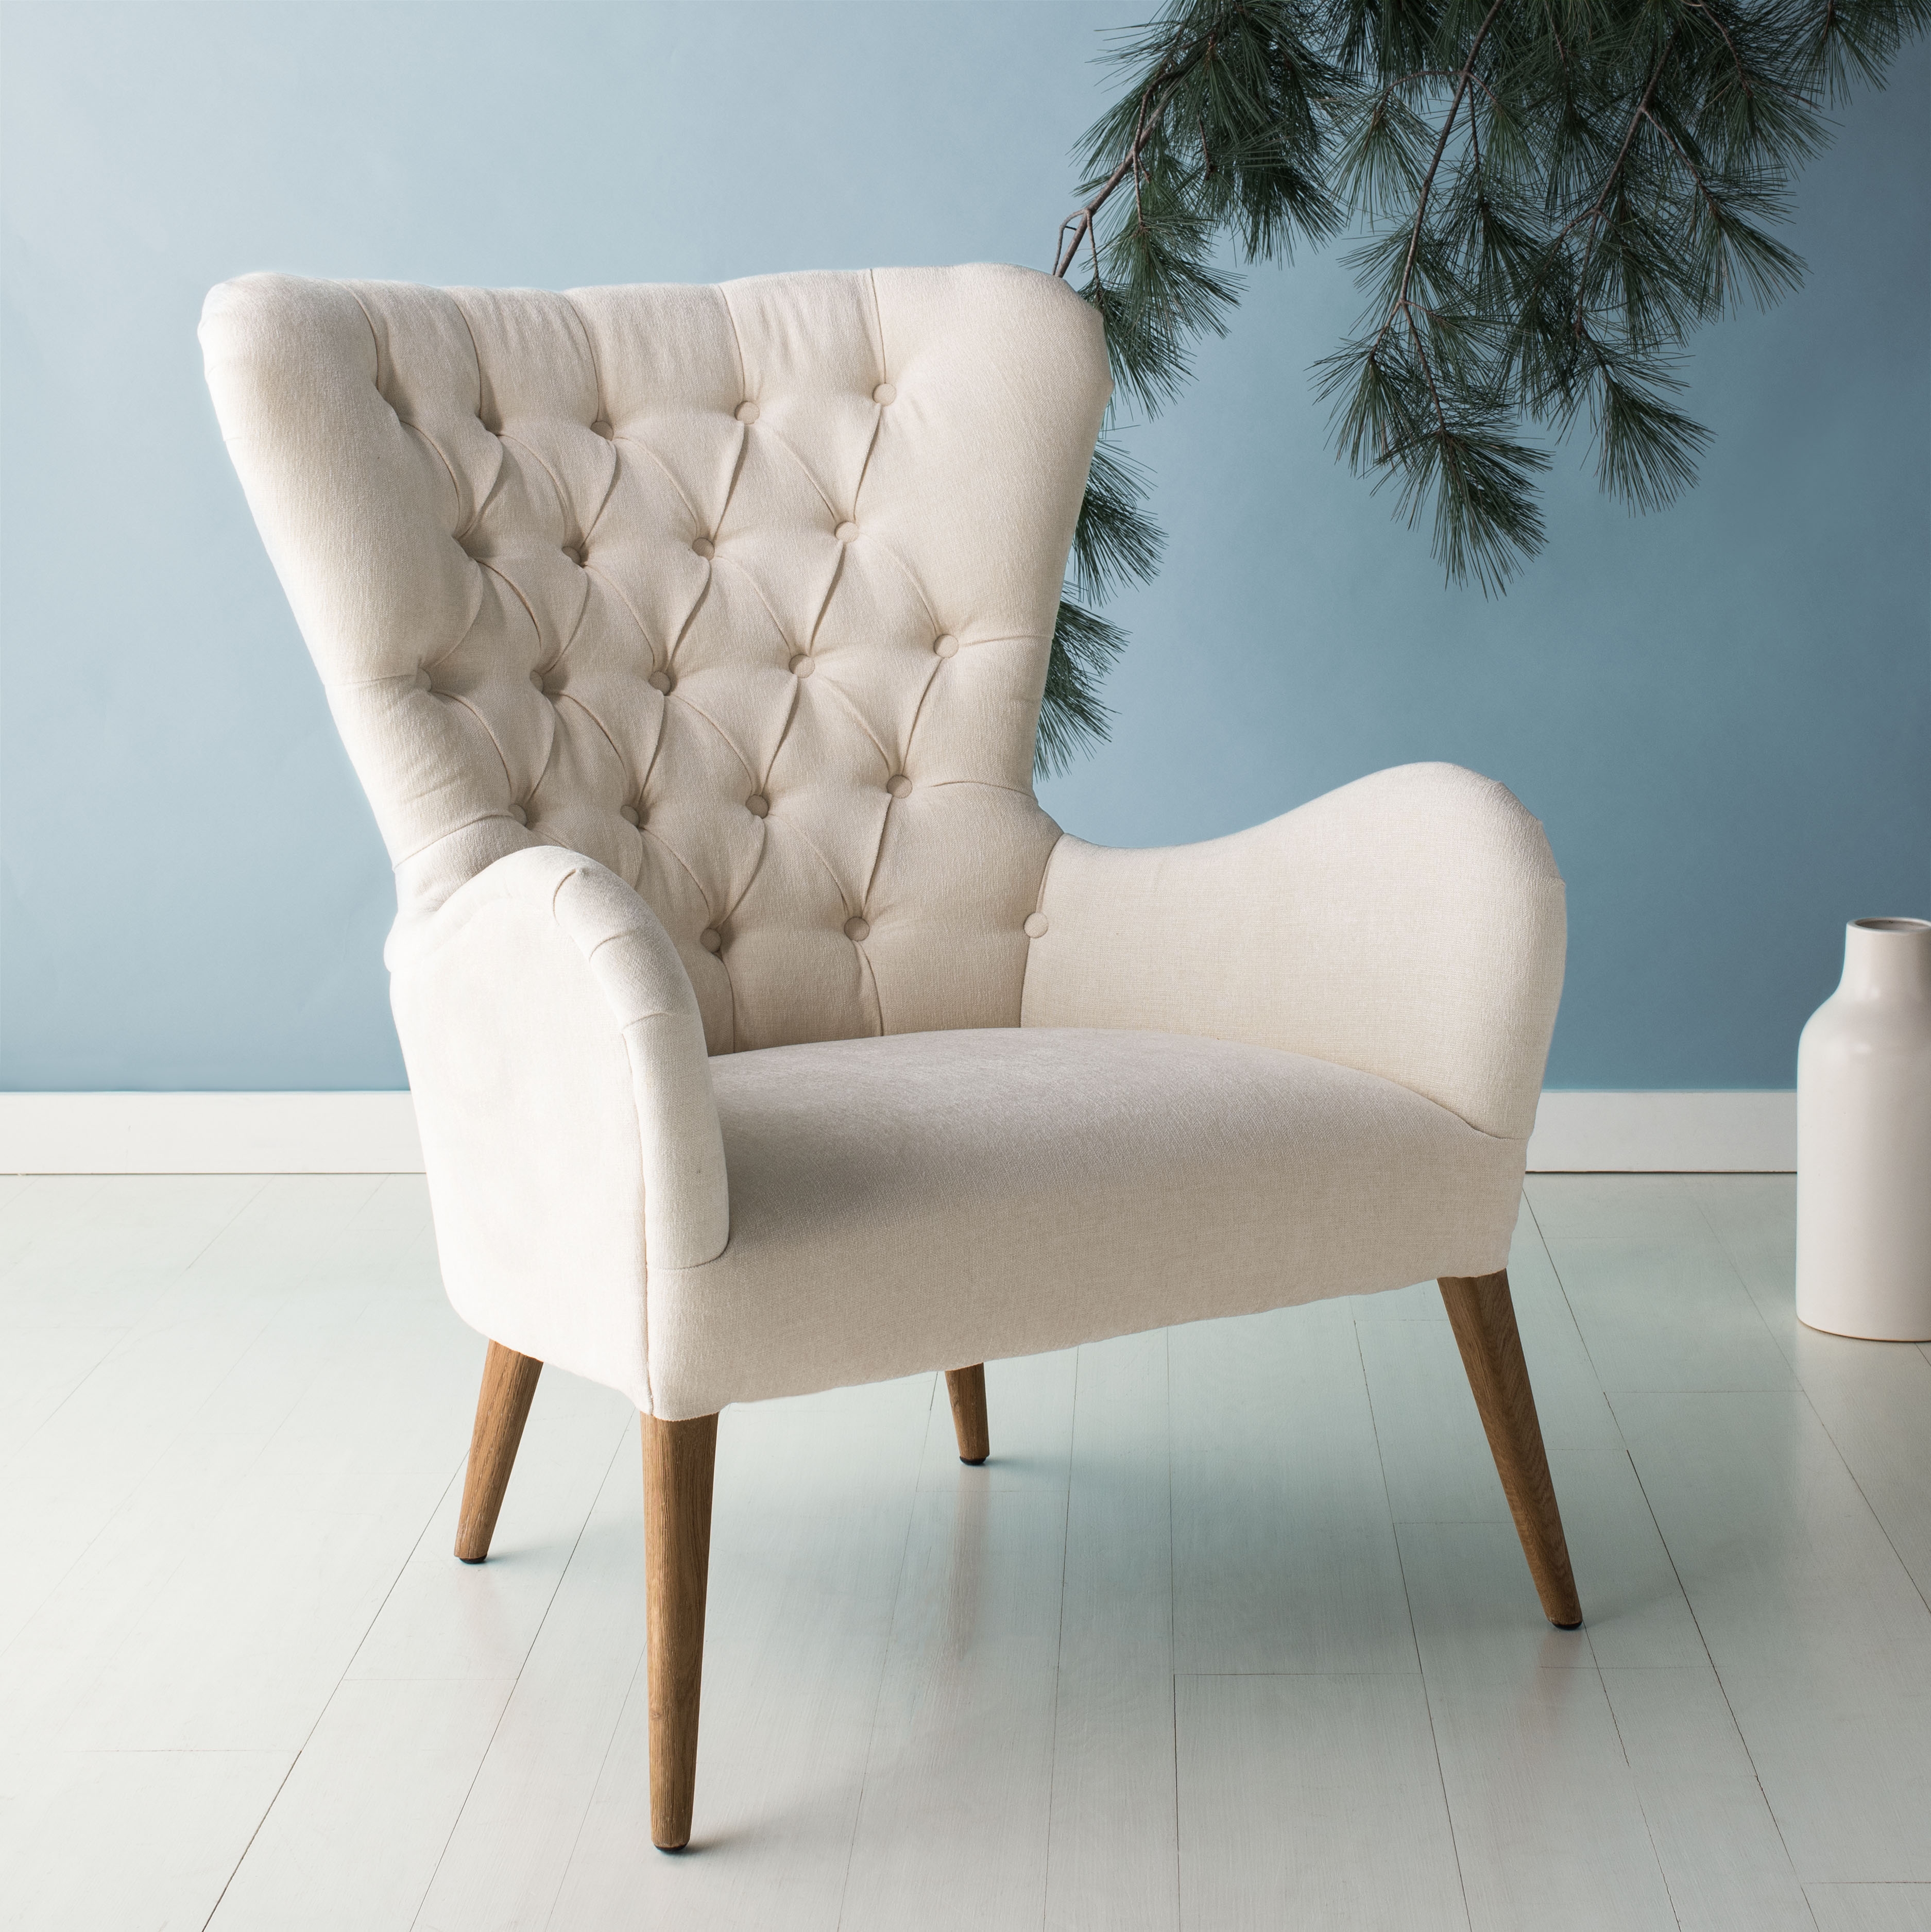 Brayden Contemporary Wingback Chair - Off White - Arlo Home - Image 1